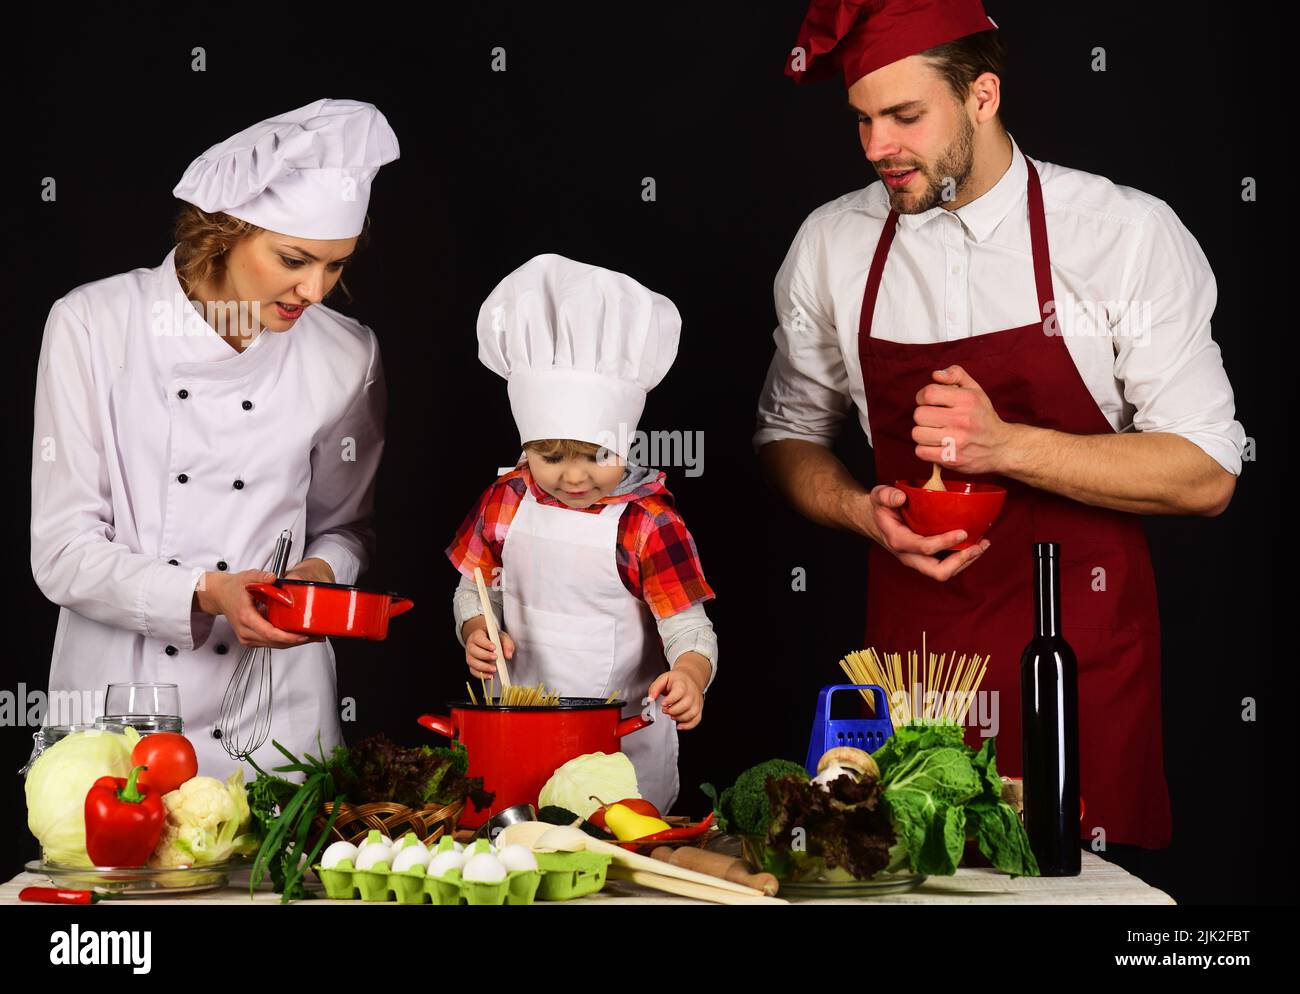 Child with parents cooking at kitchen. Happy family in chef uniform preparing dinner together. Stock Photo